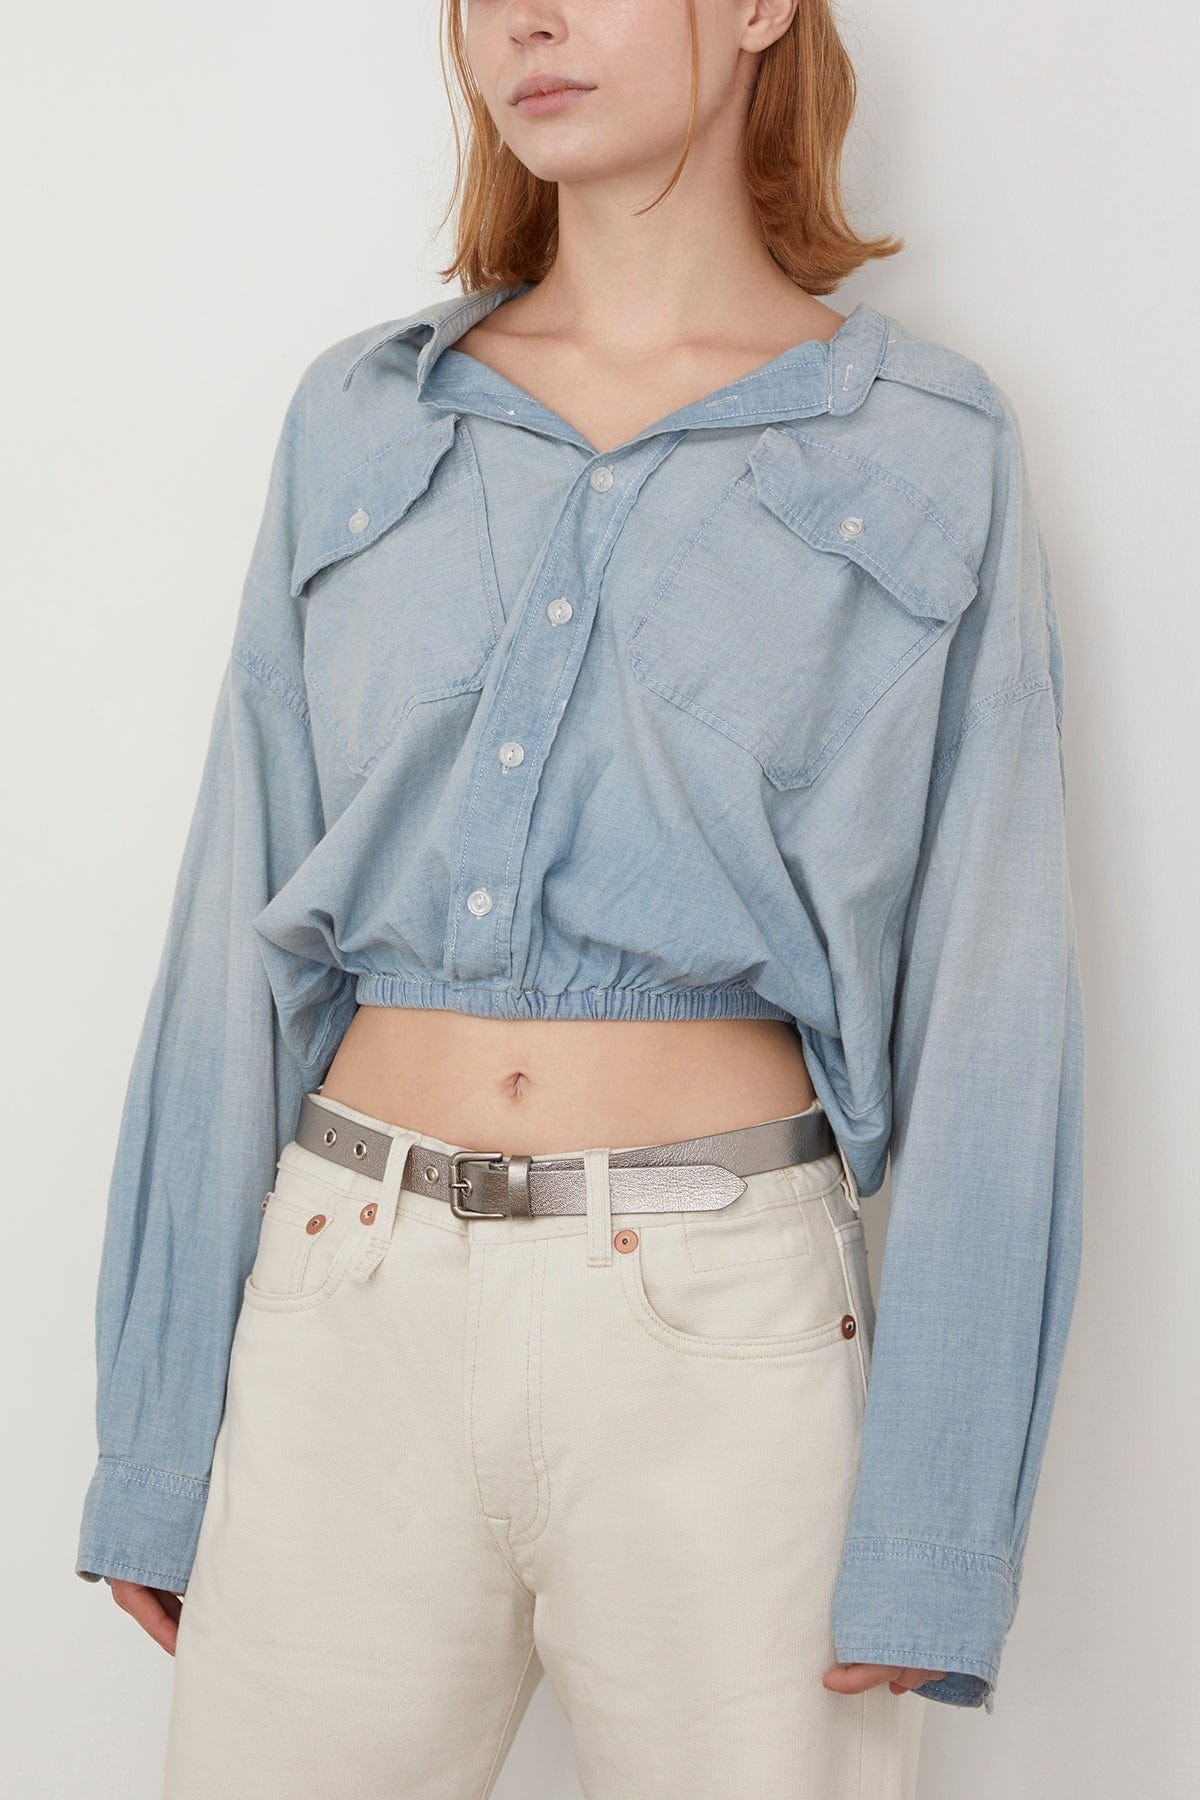 Crossover Utility Bubble Shirt in Vintage Blue Chambray - 3